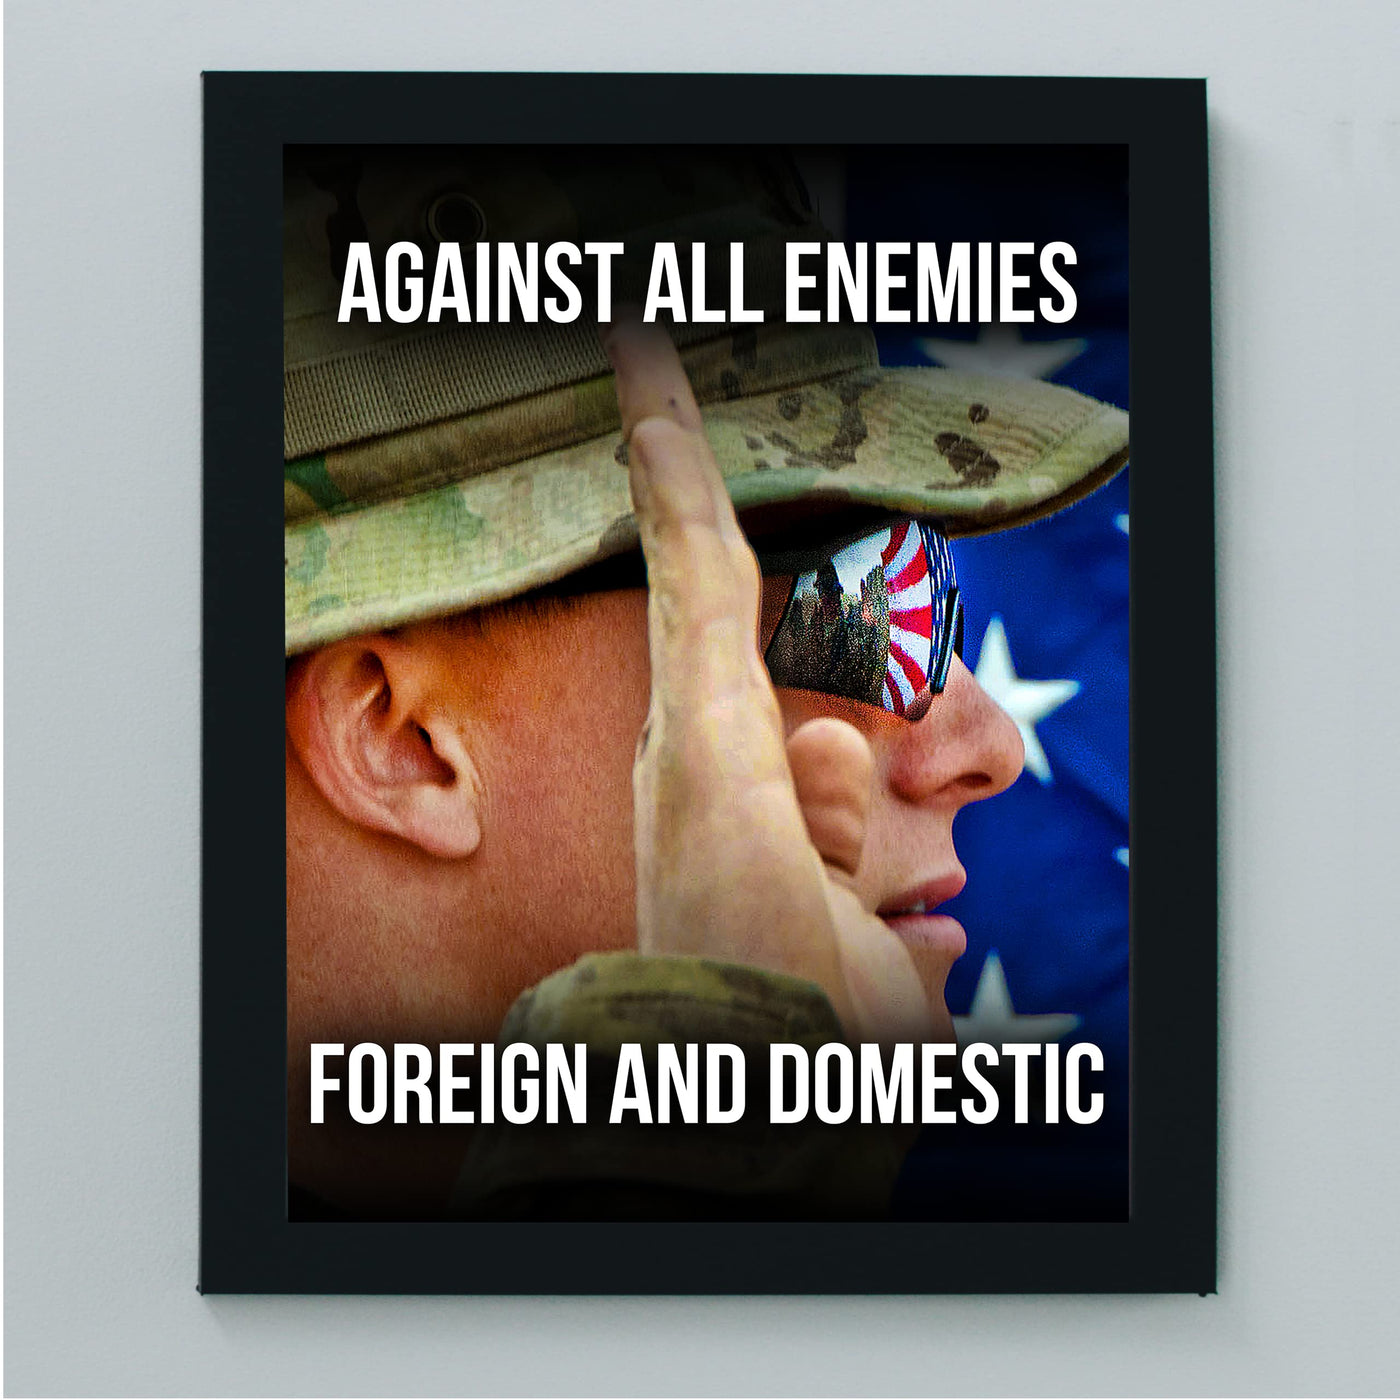 Against All Enemies Foreign & Domestic-Patriotic US Military Wall Art -8 x 10" Soldier w/American Flag Print -Ready to Frame. Home-Office-Shop-Man Cave Decor. Great Gift for Military-Veterans!